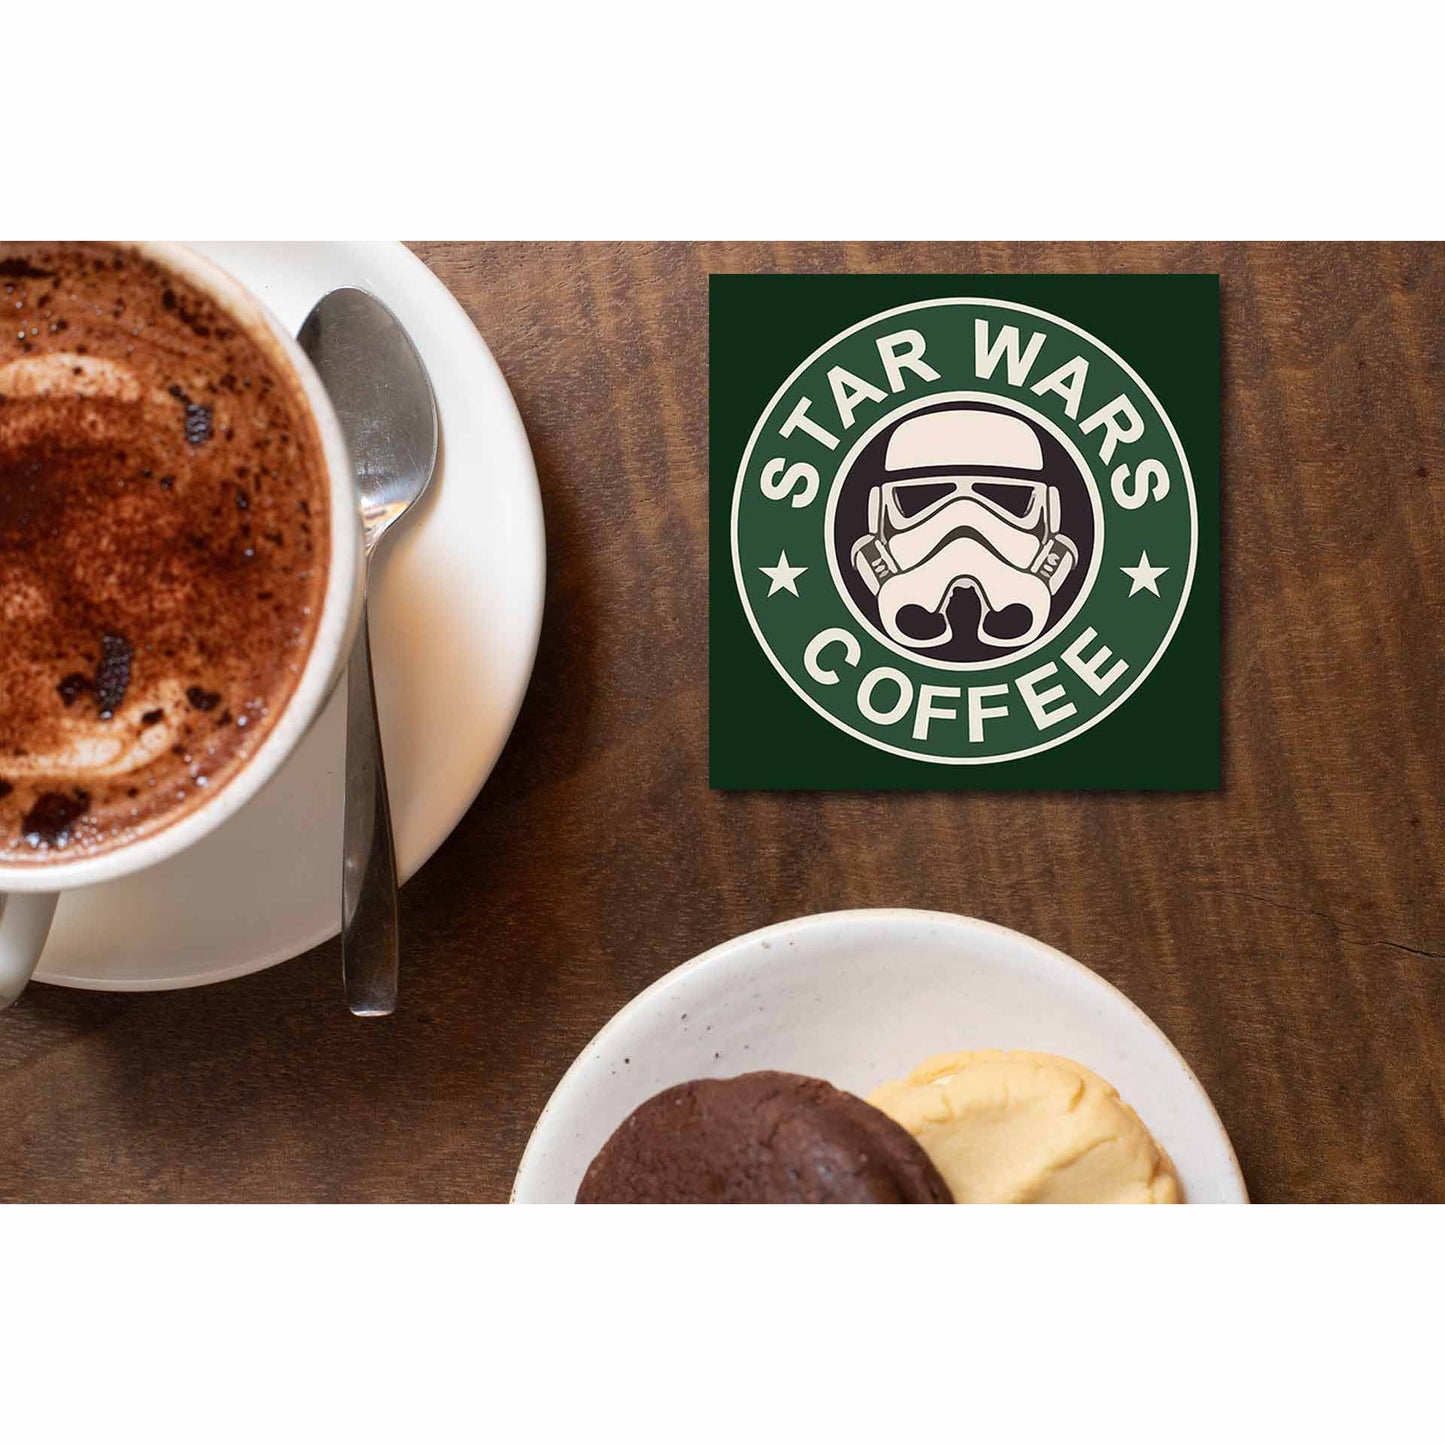 star wars star coffee coasters wooden table cups indian tv & movies buy online india the banyan tee tbt men women girls boys unisex